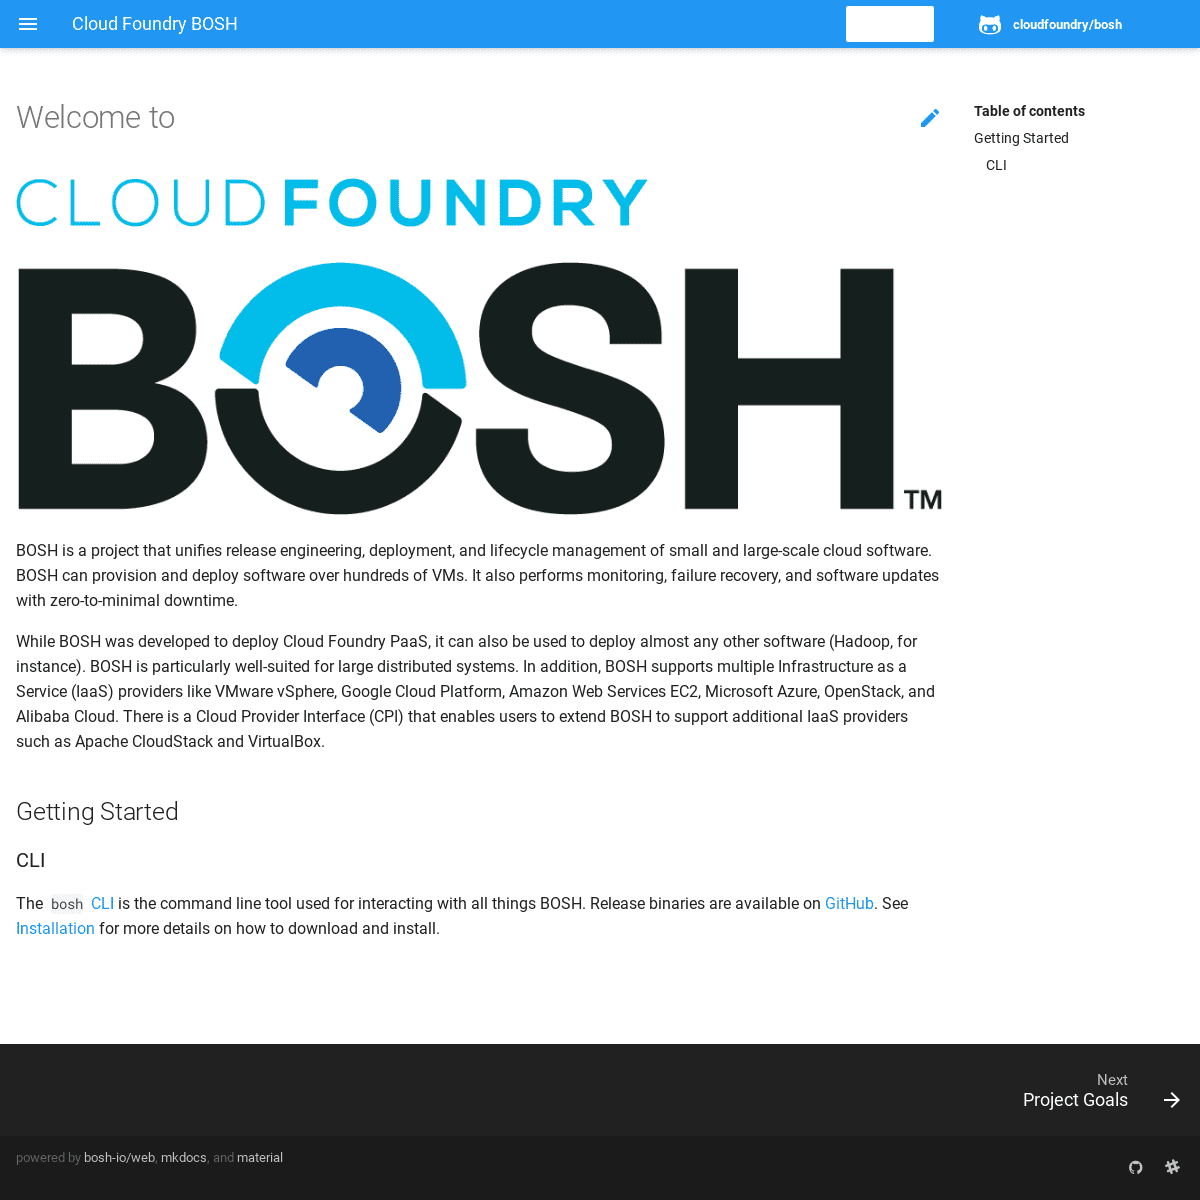 A complete backup of https://bosh.io